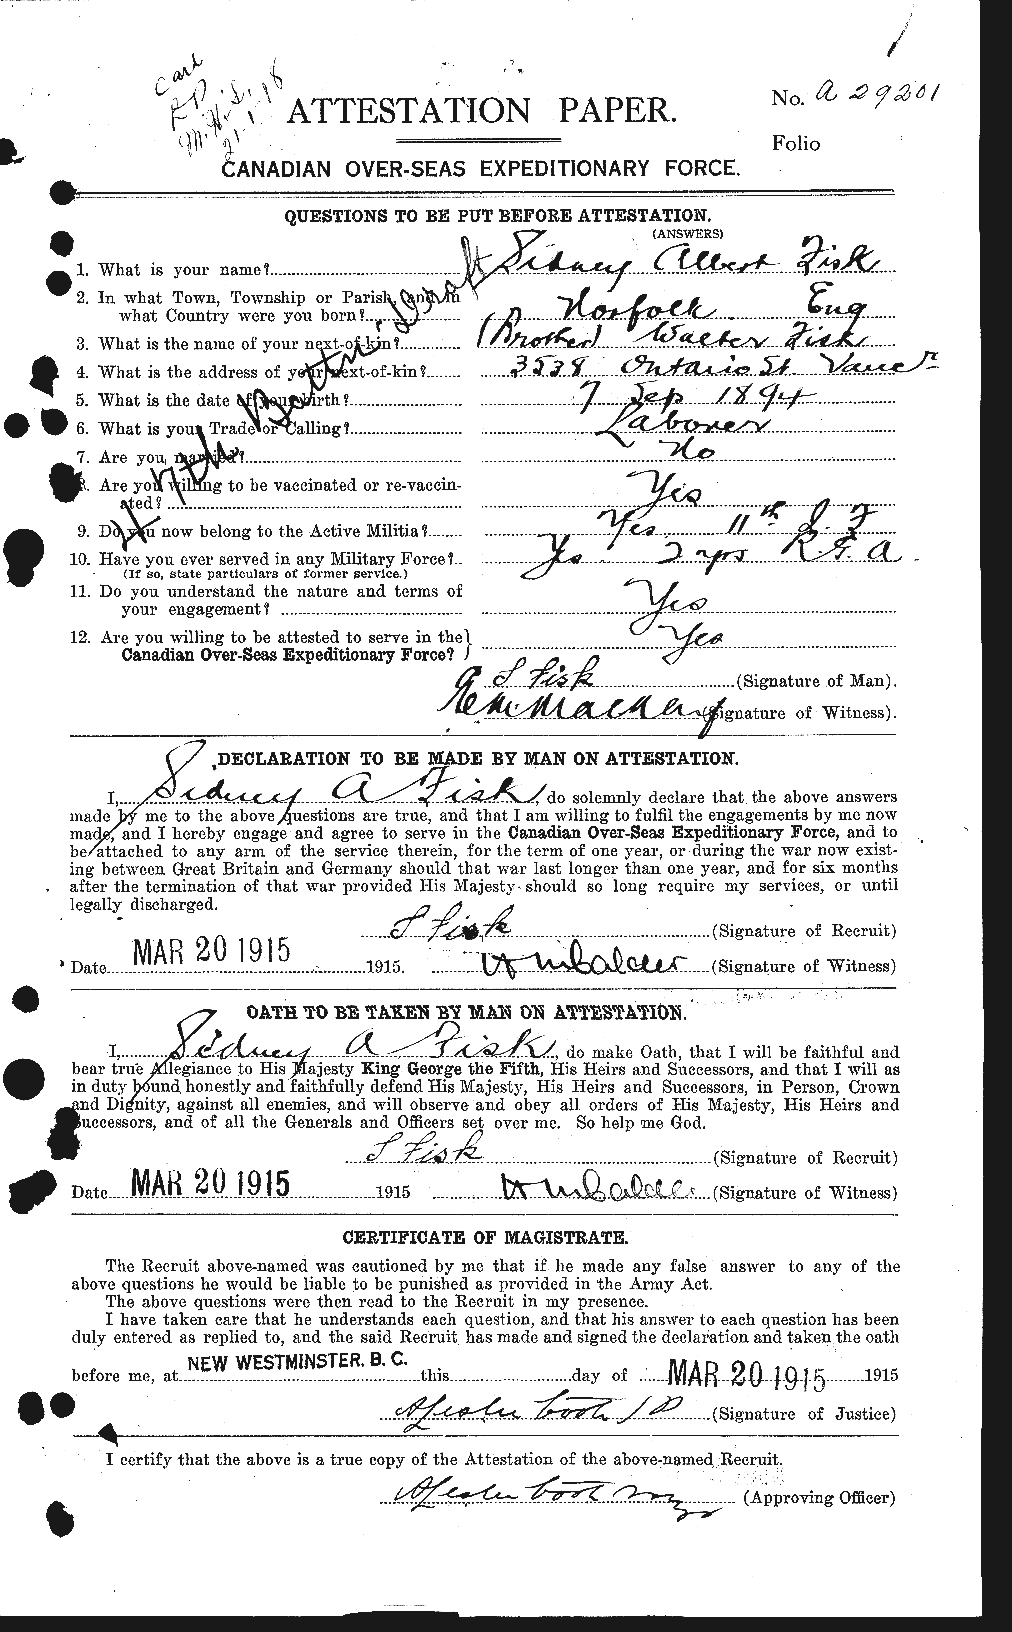 Personnel Records of the First World War - CEF 322480a